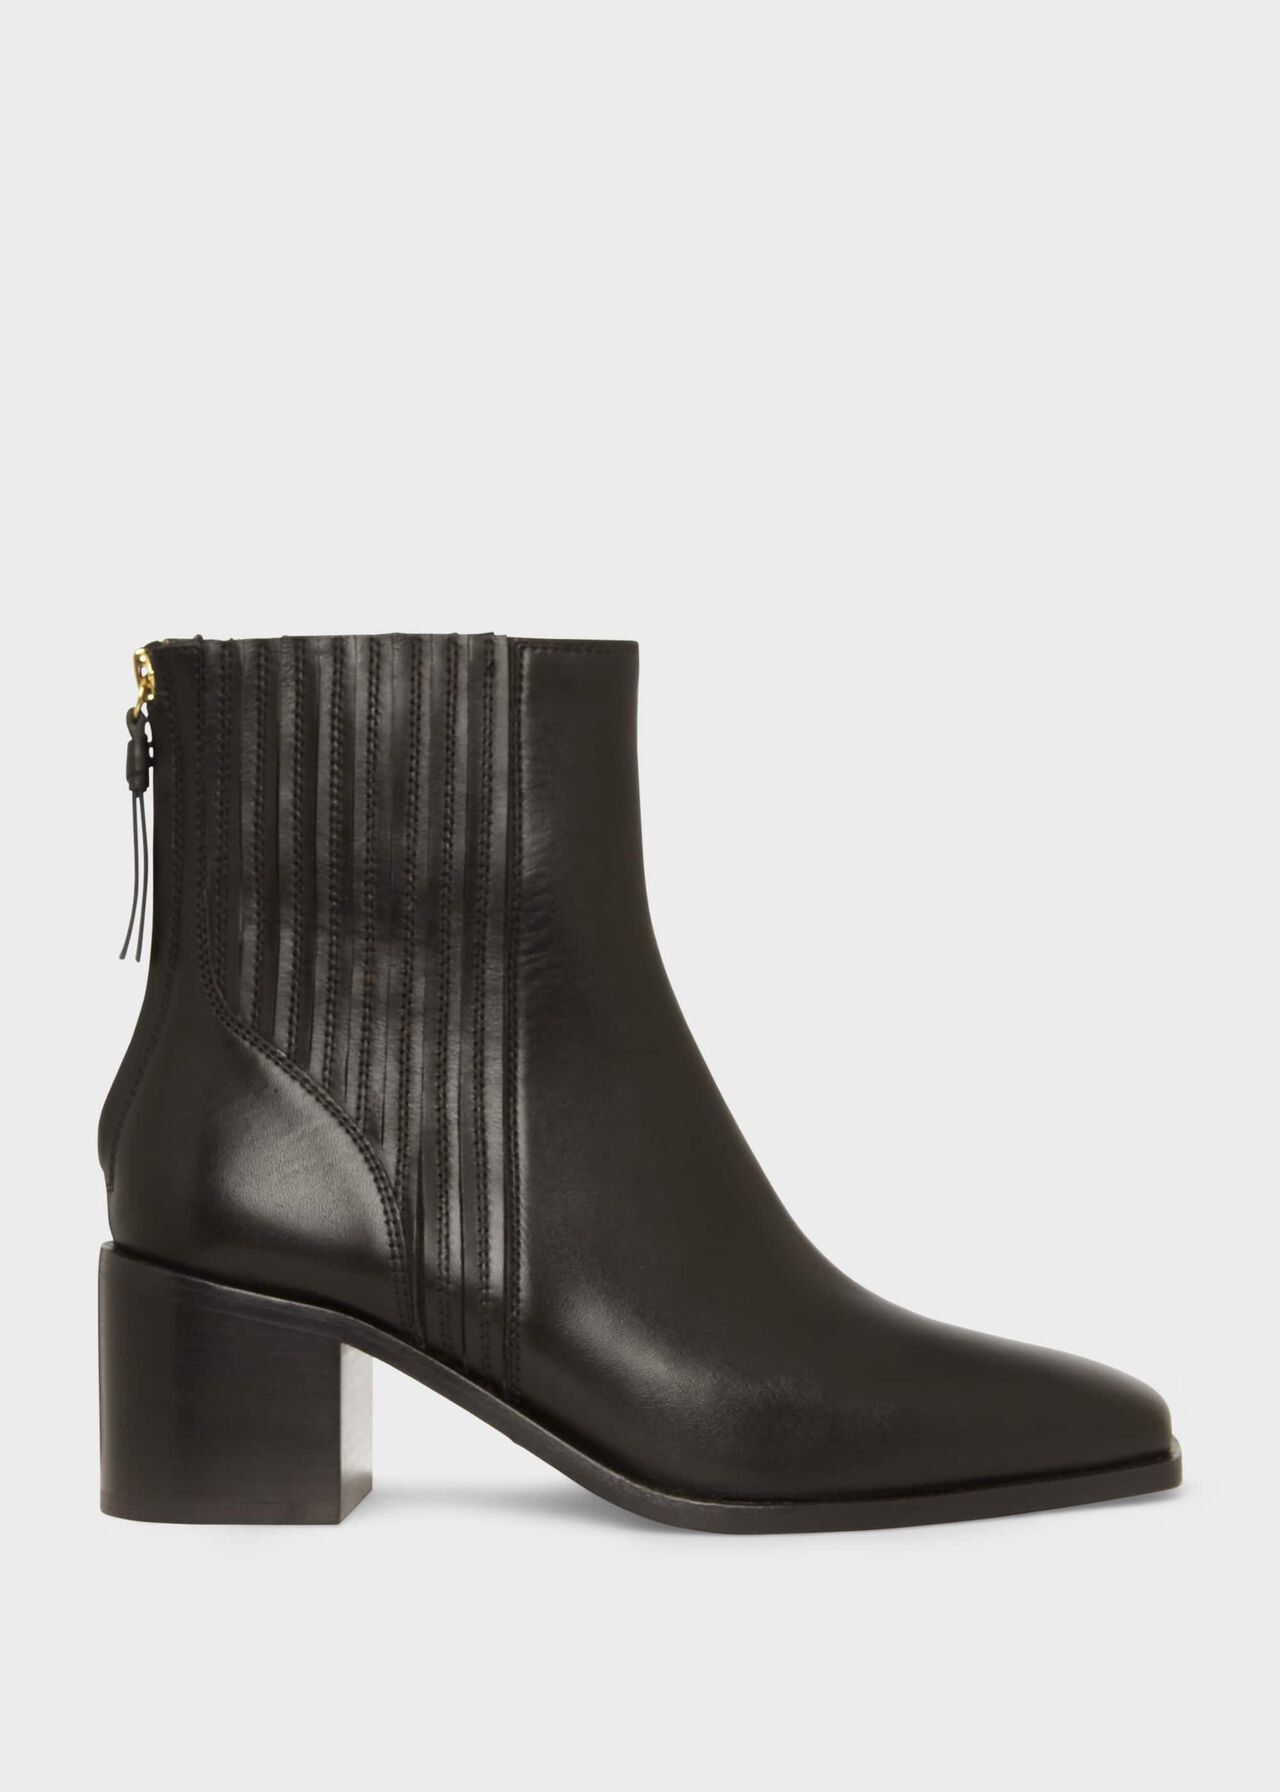 Willa Ankle Boots, Black, hi-res